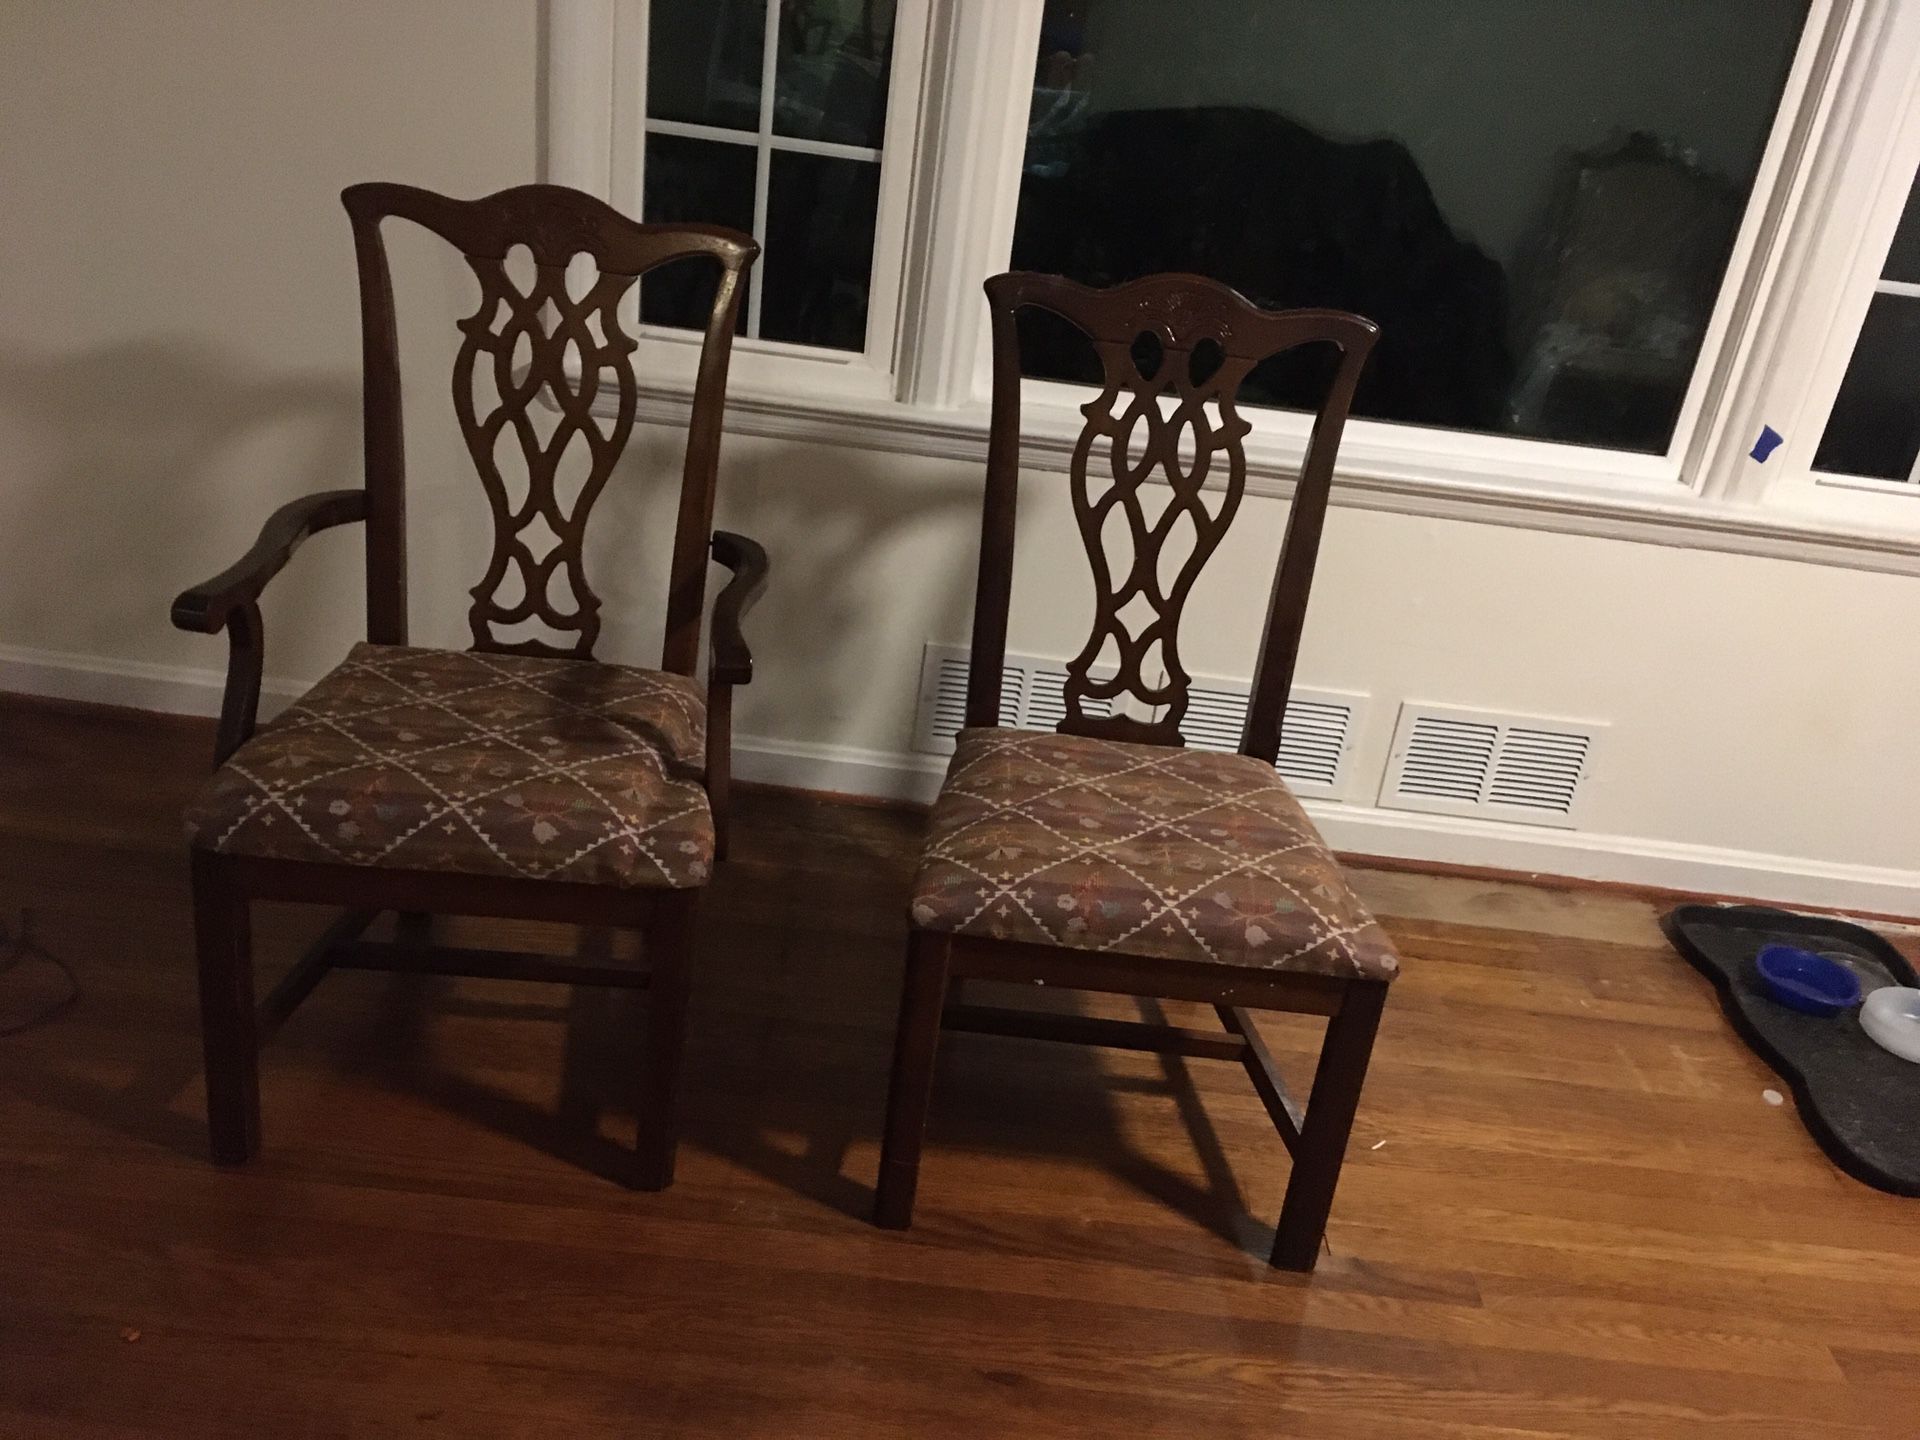 Dinning room chairs - 6 total/ Sillas Comedor